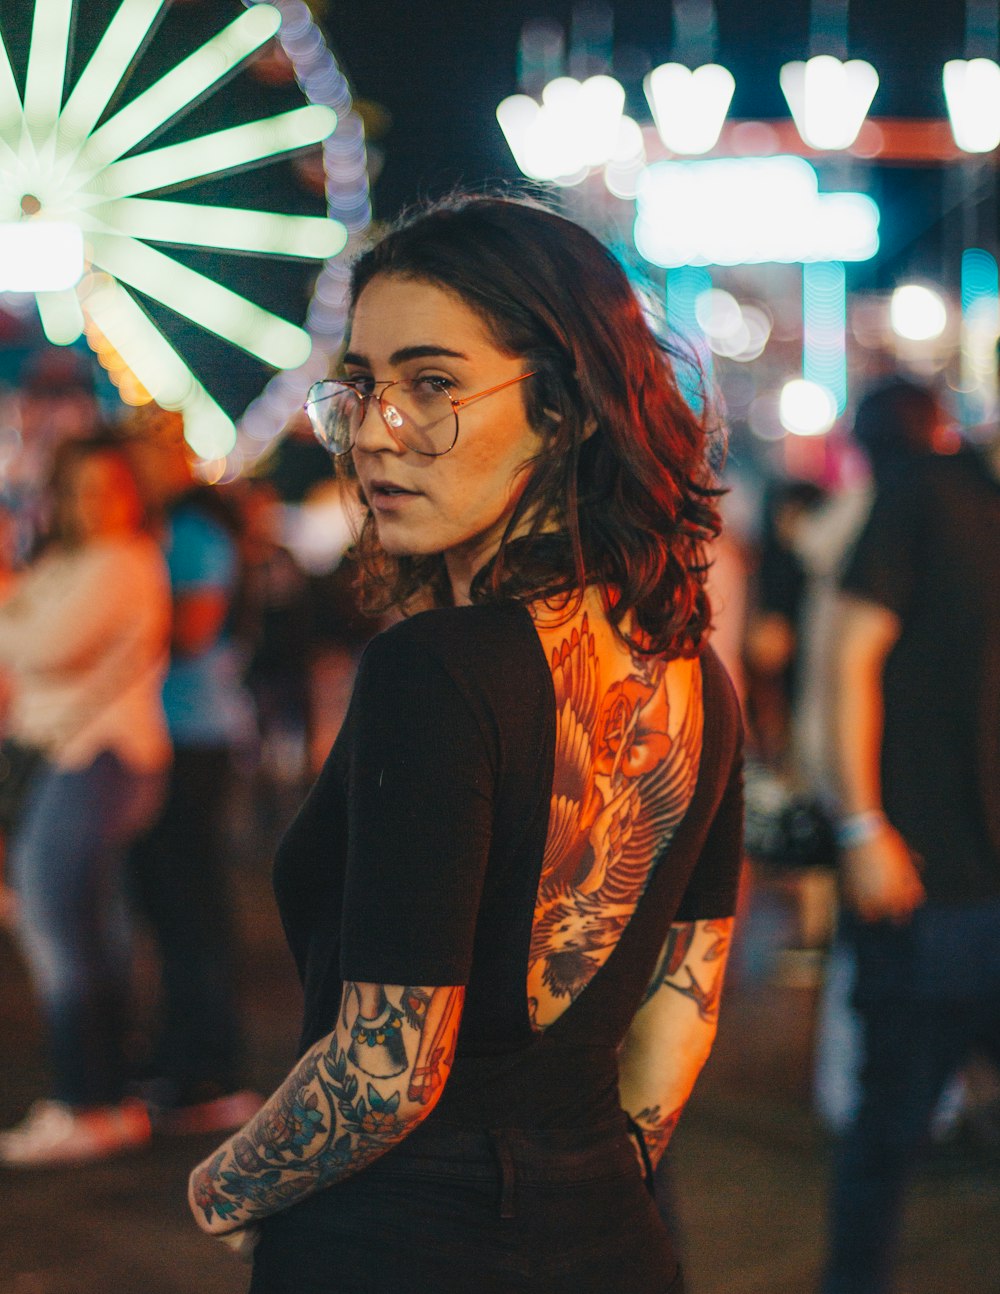 Girl With Tattoos Pictures | Download Free Images on Unsplash